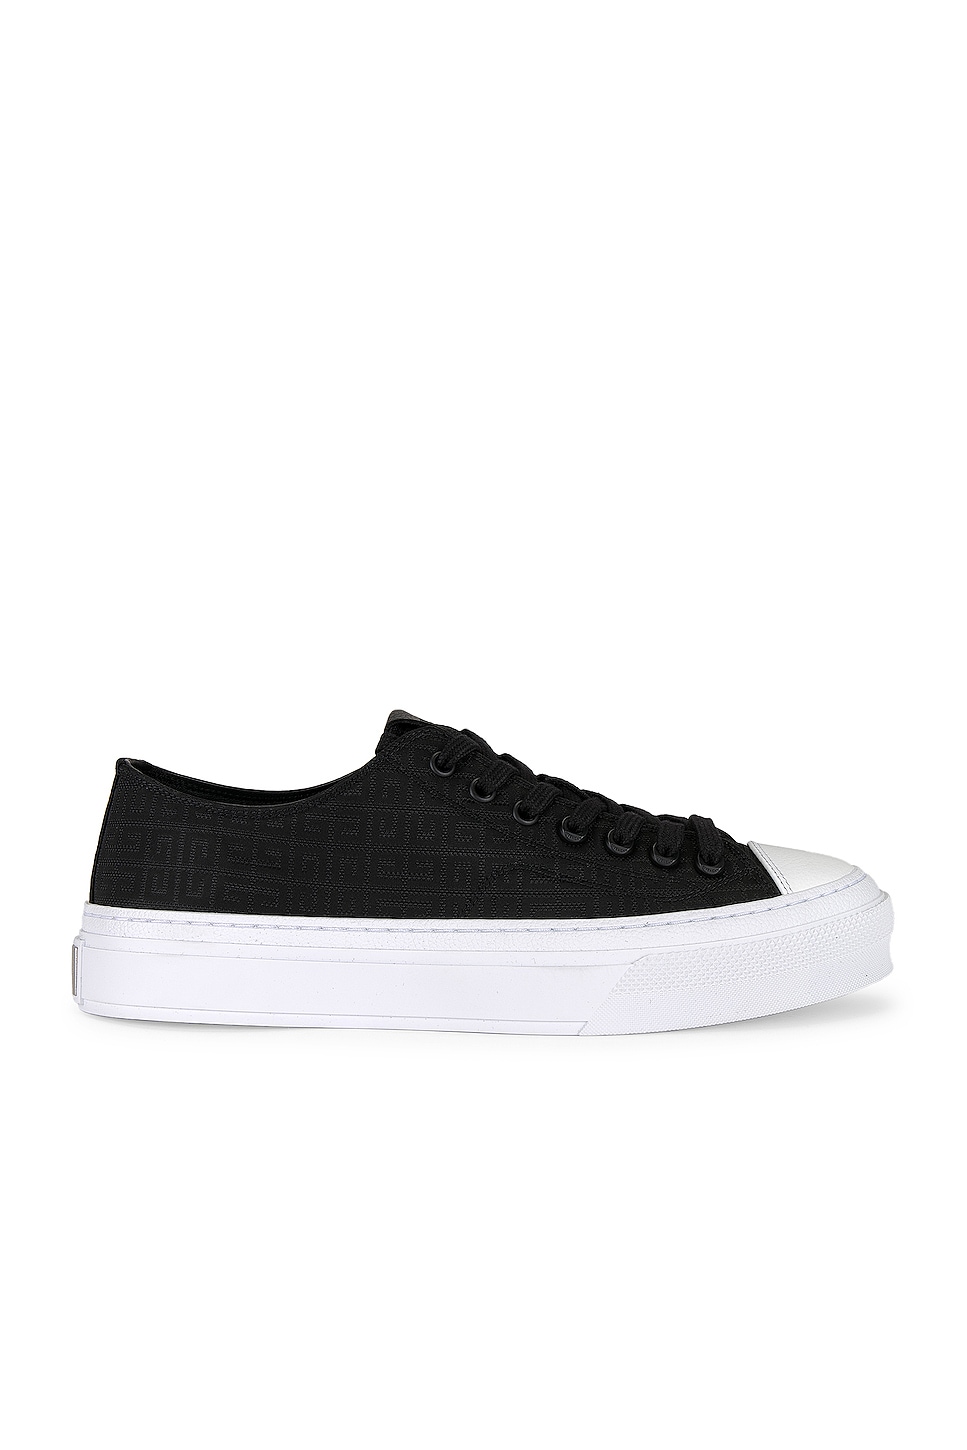 Image 1 of Givenchy City Low Sneaker in Black